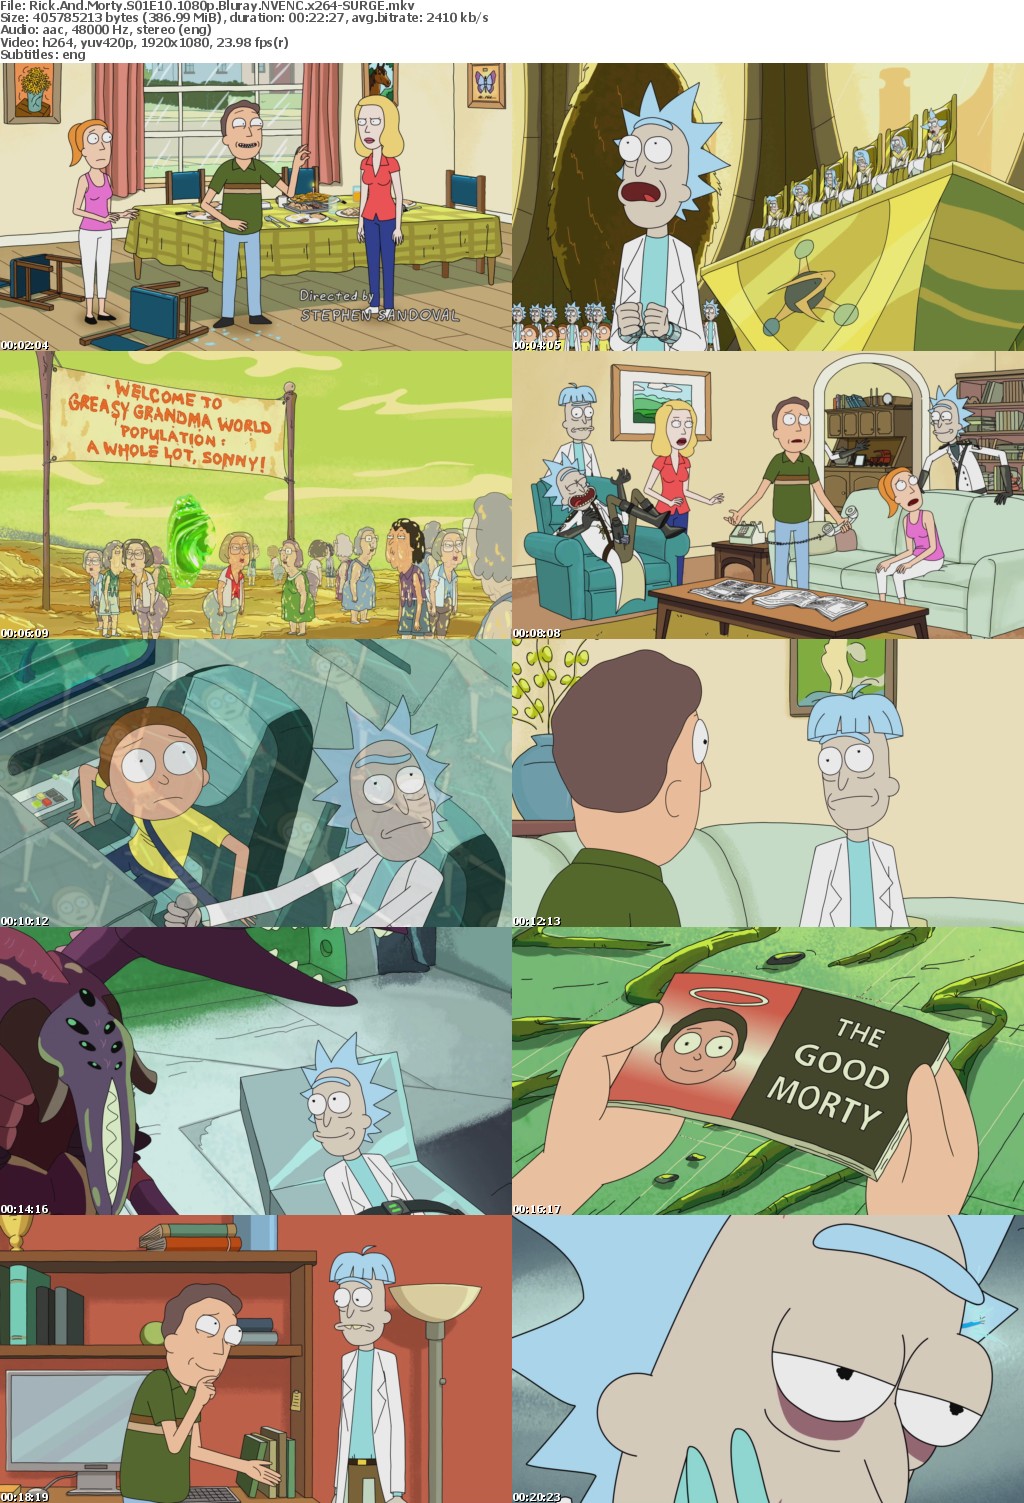 Rick And Morty S01 COMPLETE 1080p Bluray NVENC x264-SURGE